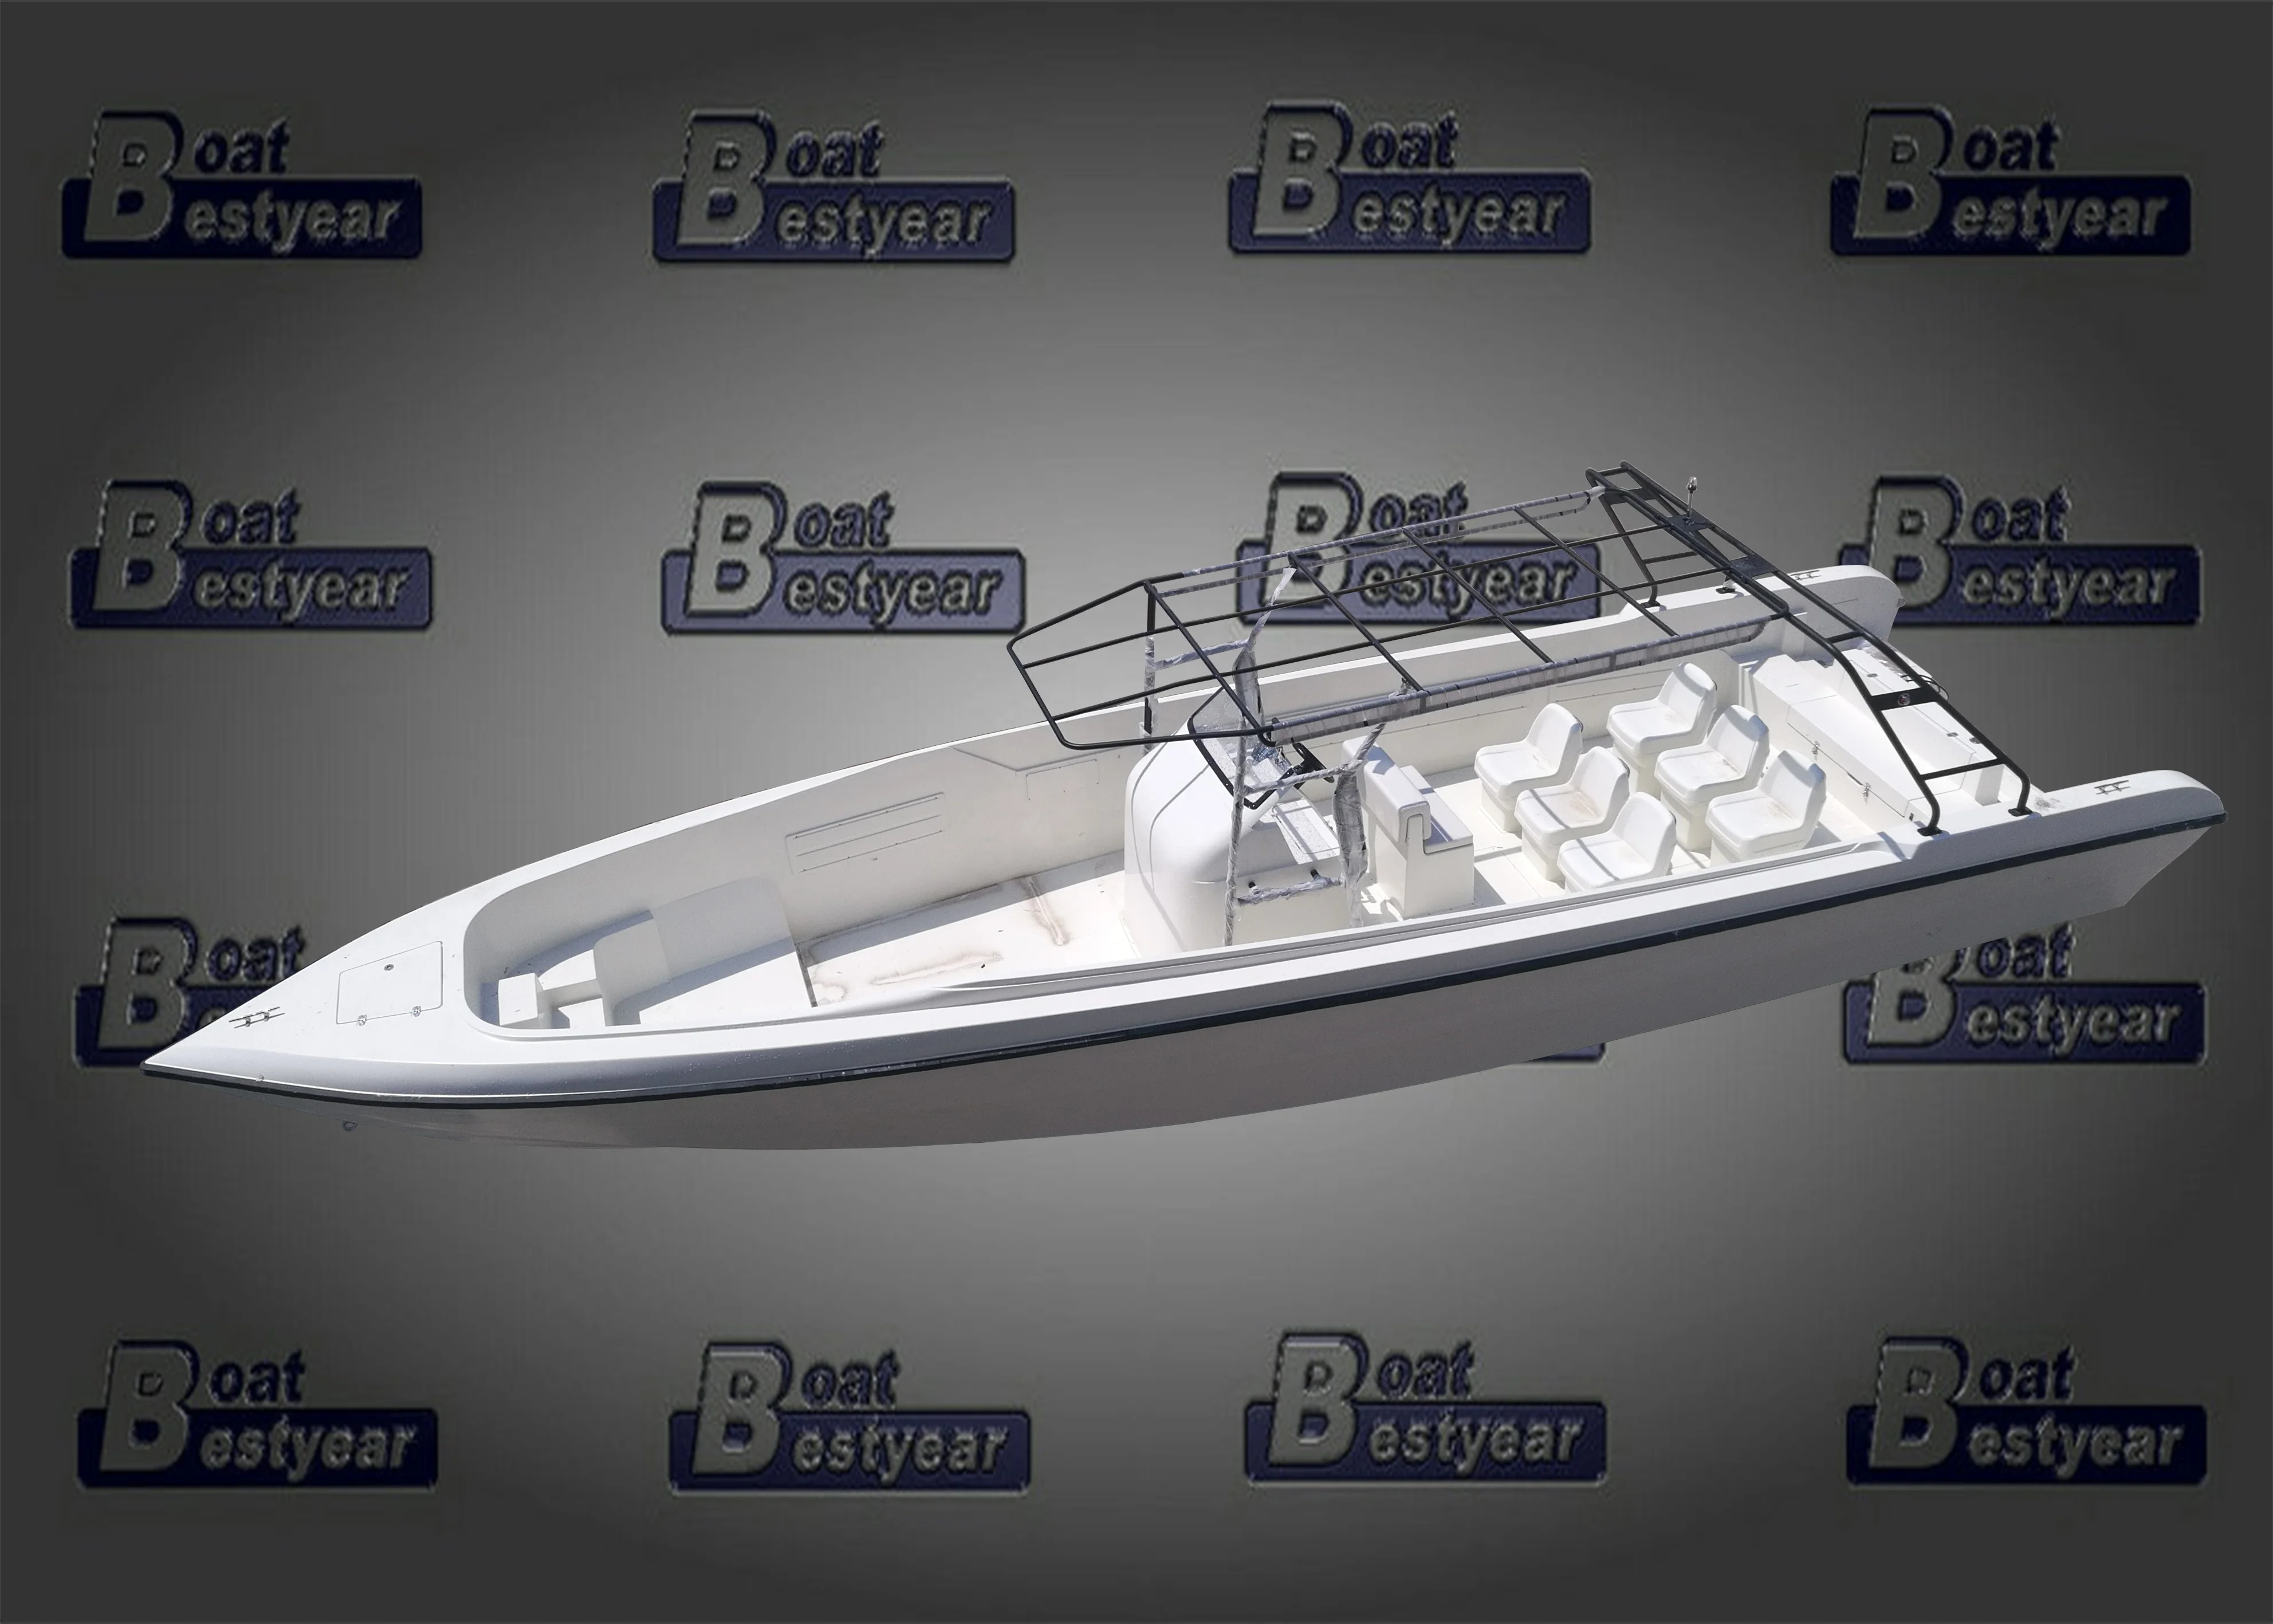 High Speed 38ft Fishing Boat